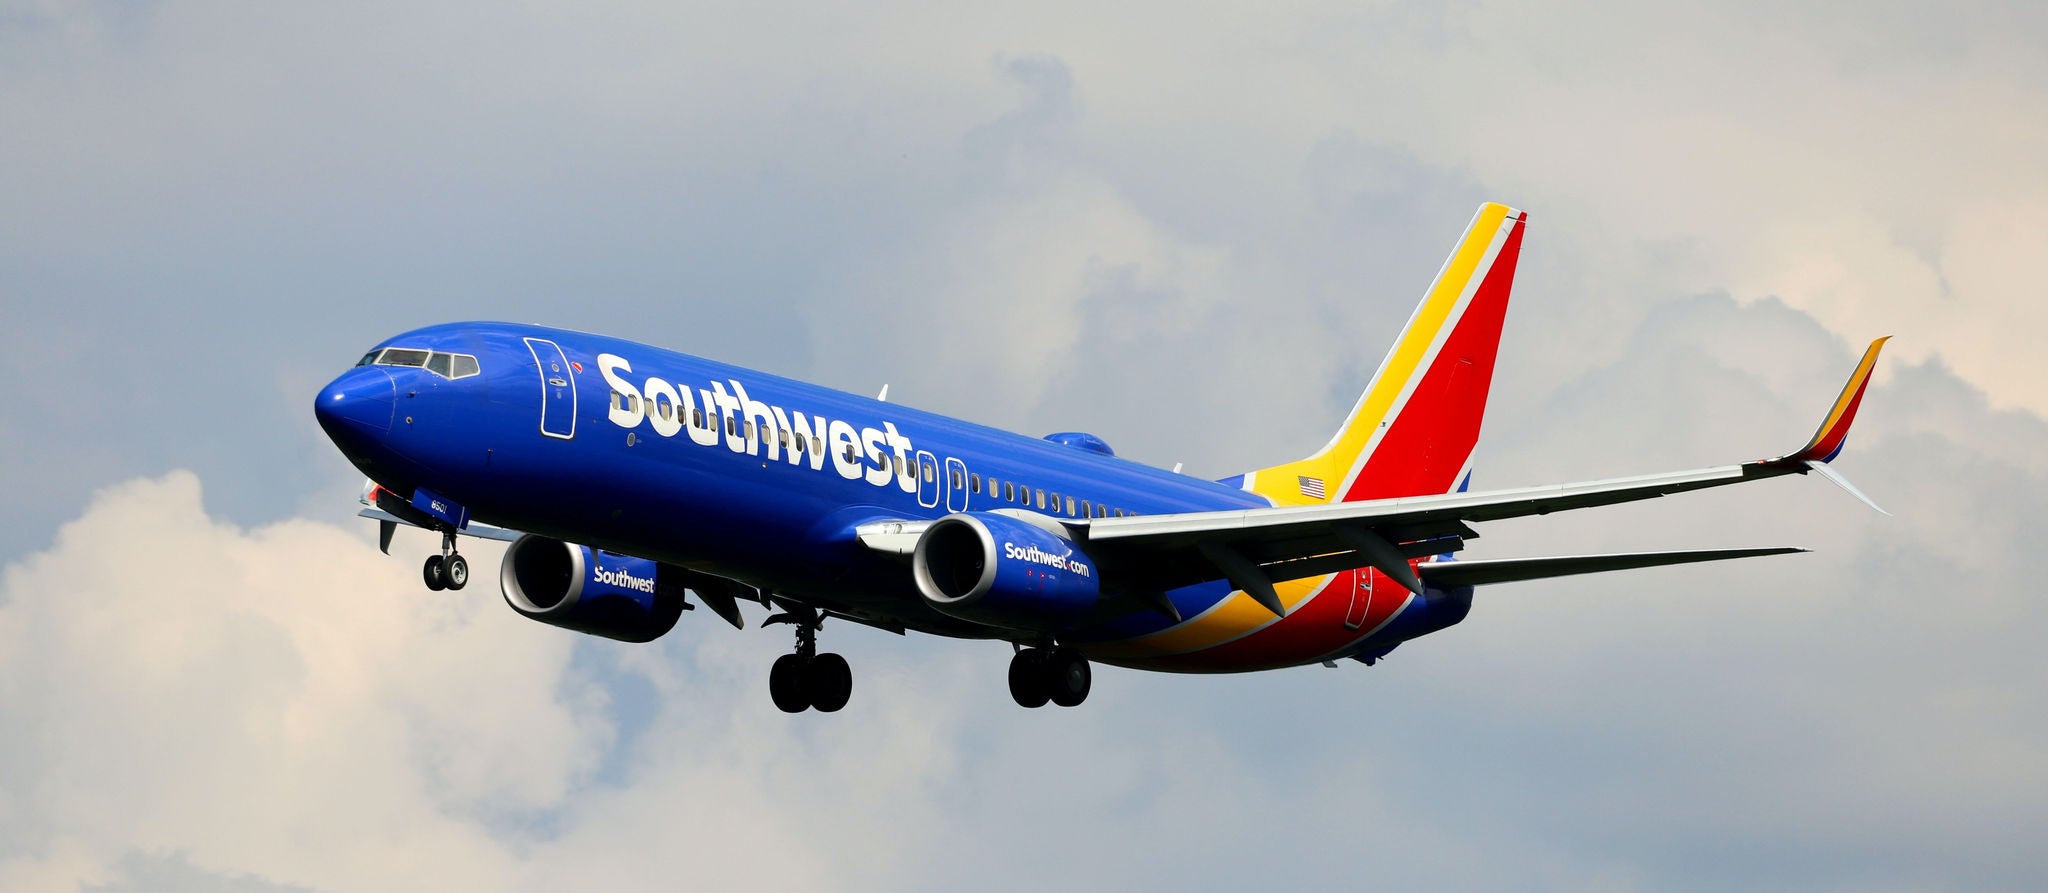 southwest airlines plane flying